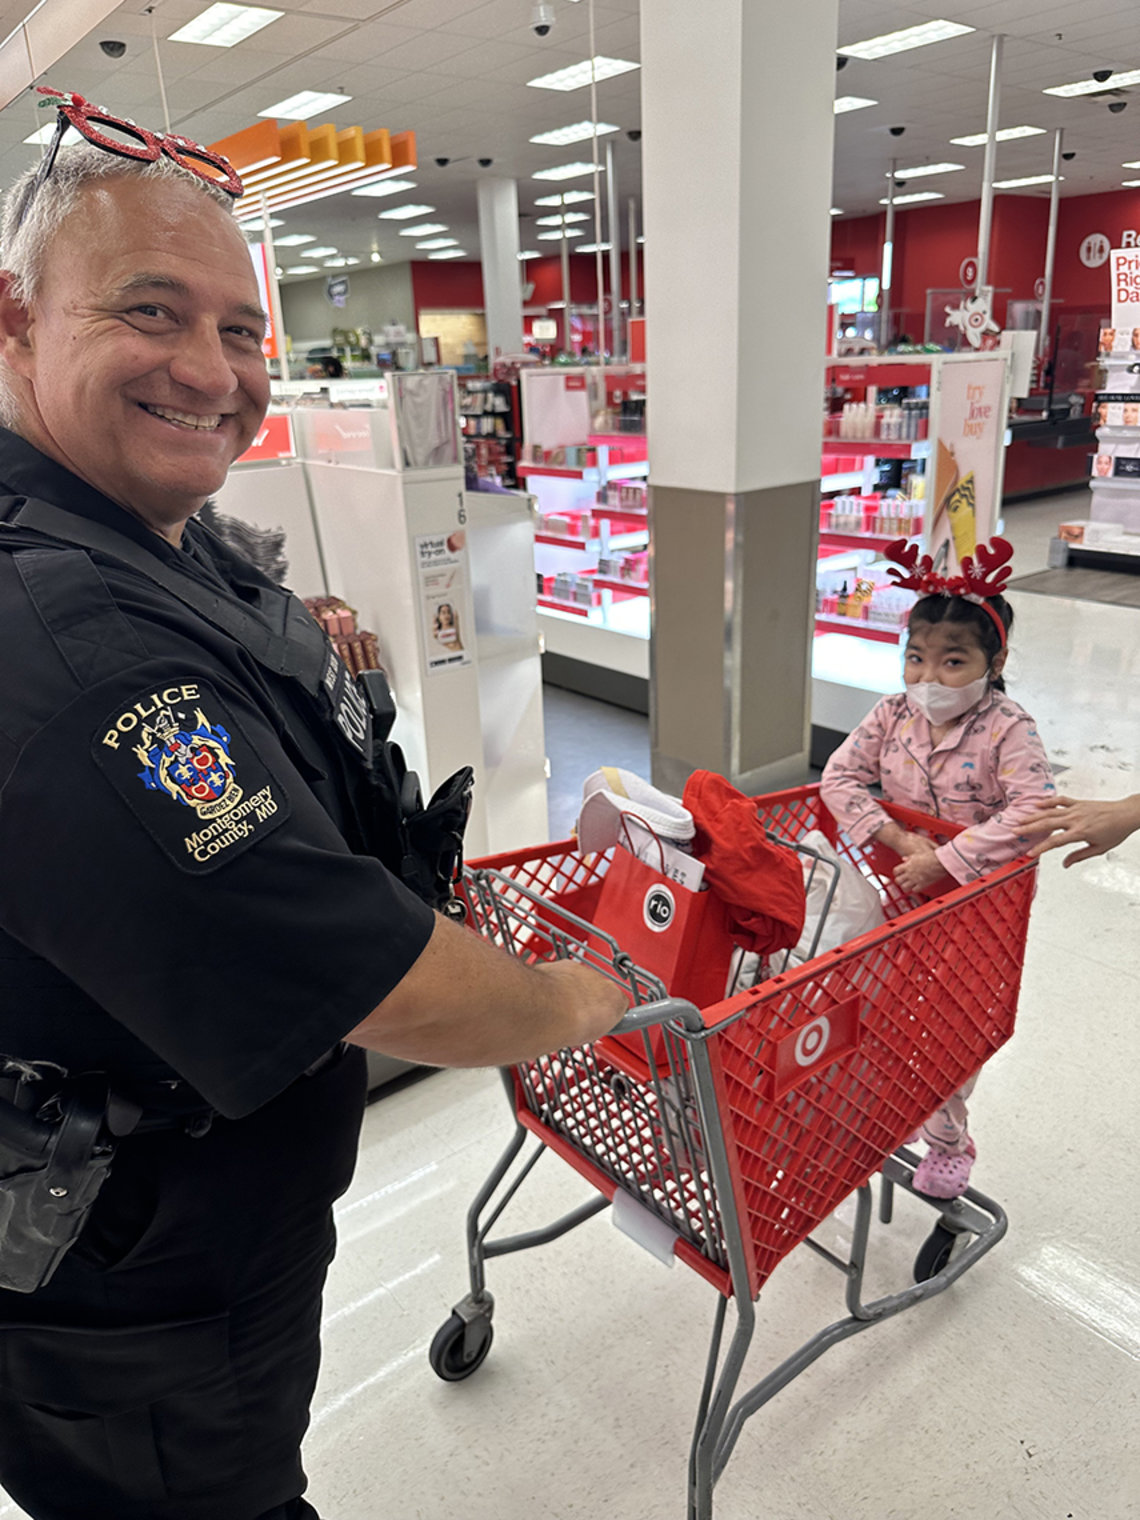 A police officer pushes a child in a grocery cart